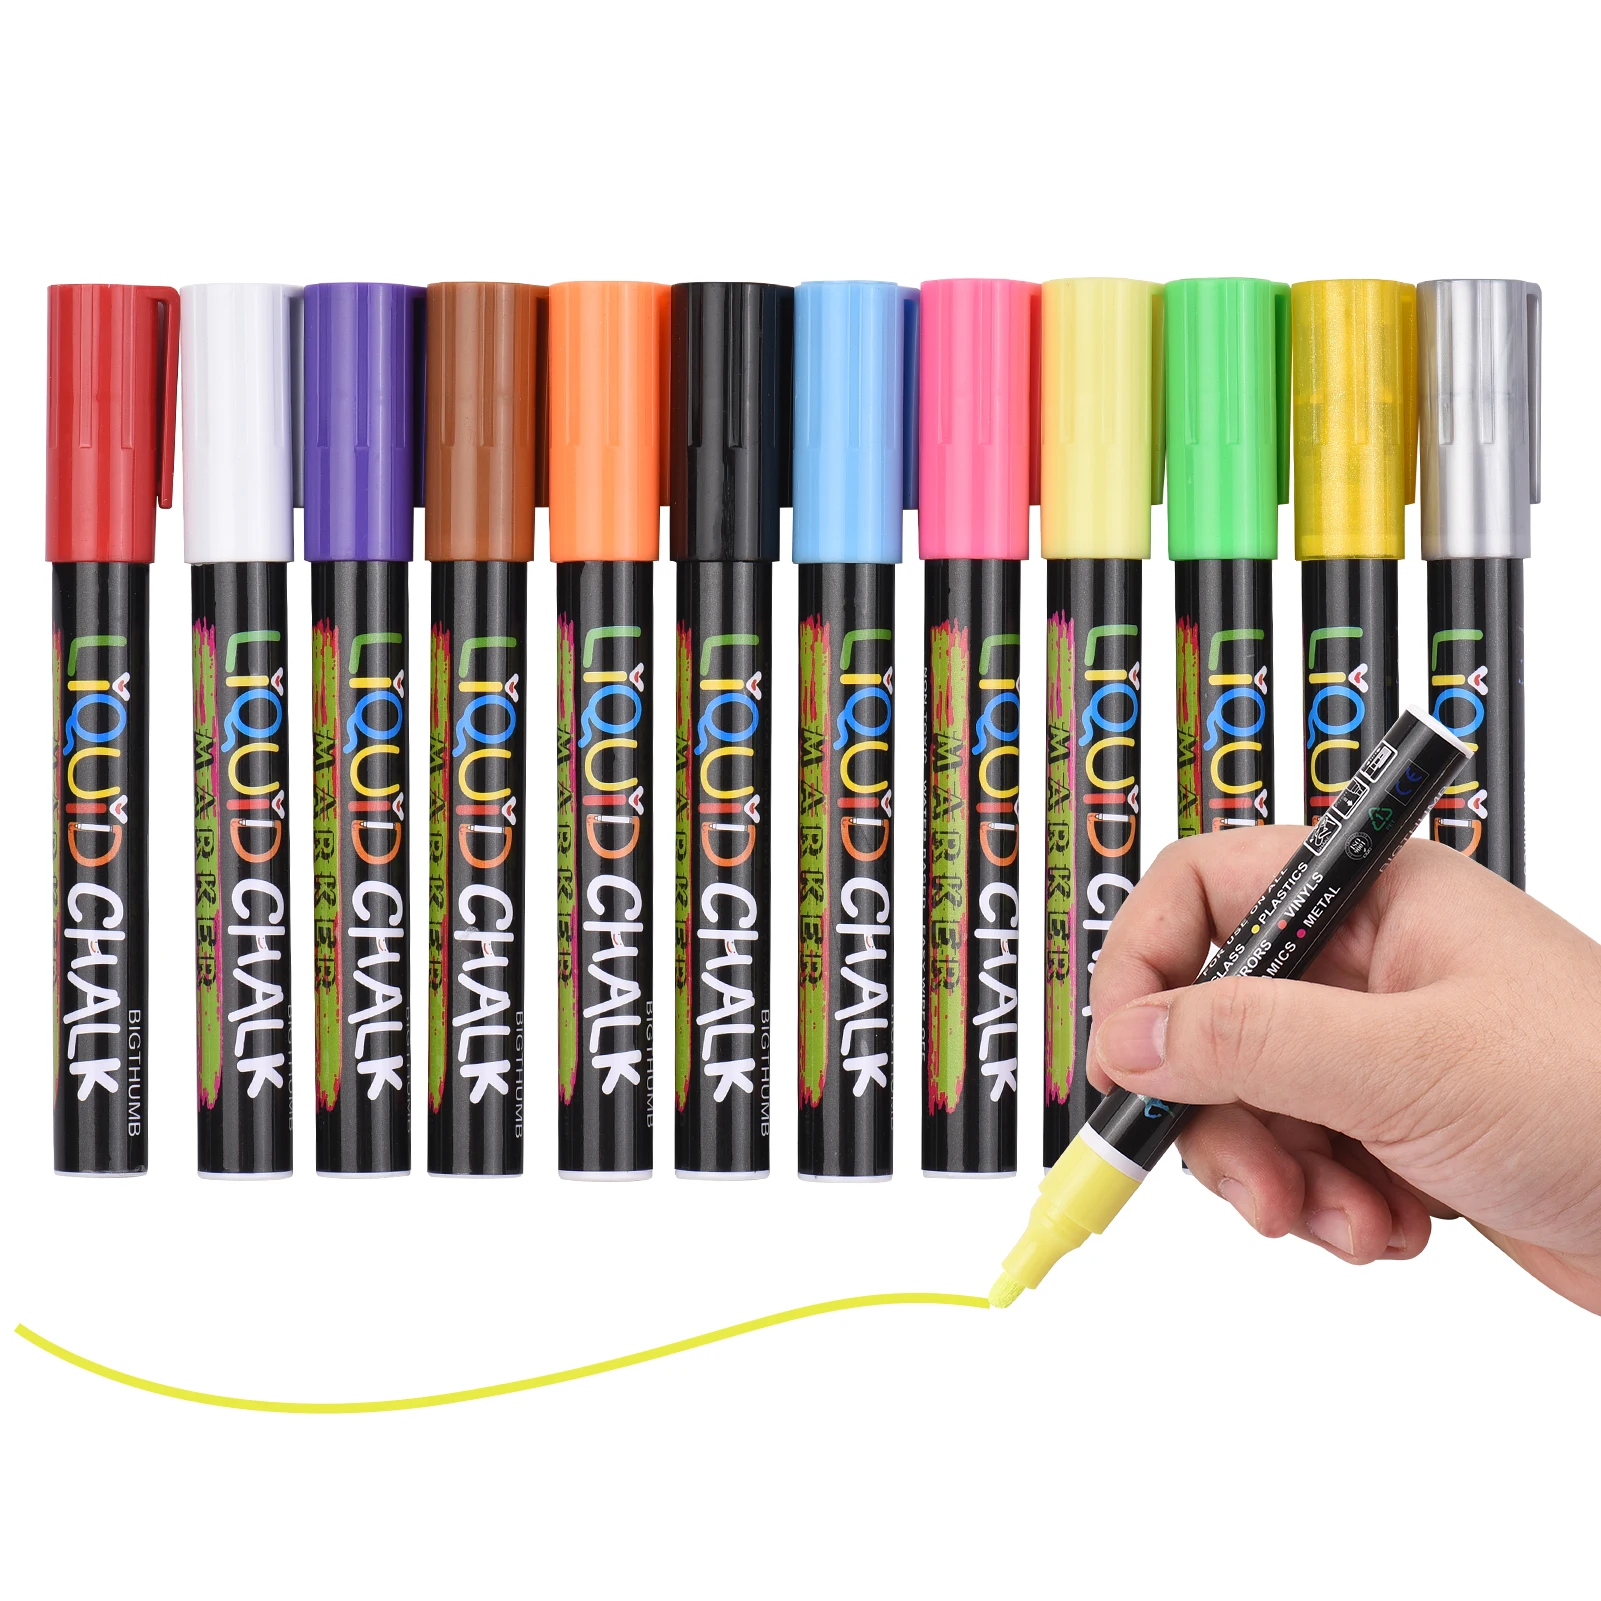 

Liquid Chalk Markers Erasable Water-based Chalkboards Marker Pens Non Toxic Quick Drying for Blackboard Glass Mirror Office Home